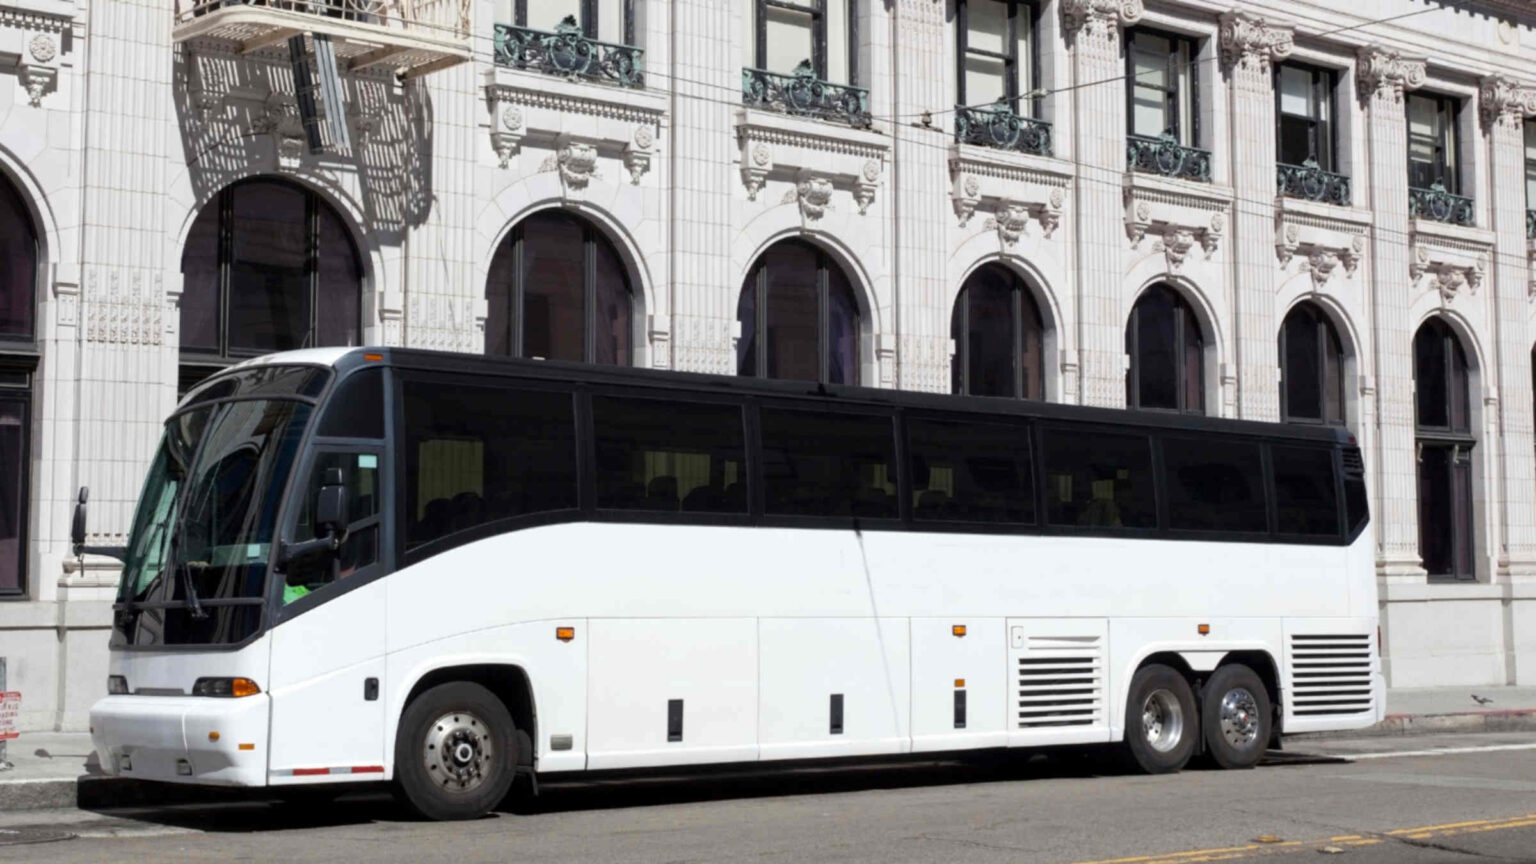 Are you planning your next exciting adventure? Look no further than using a charter bus to go wherever you want at great prices!